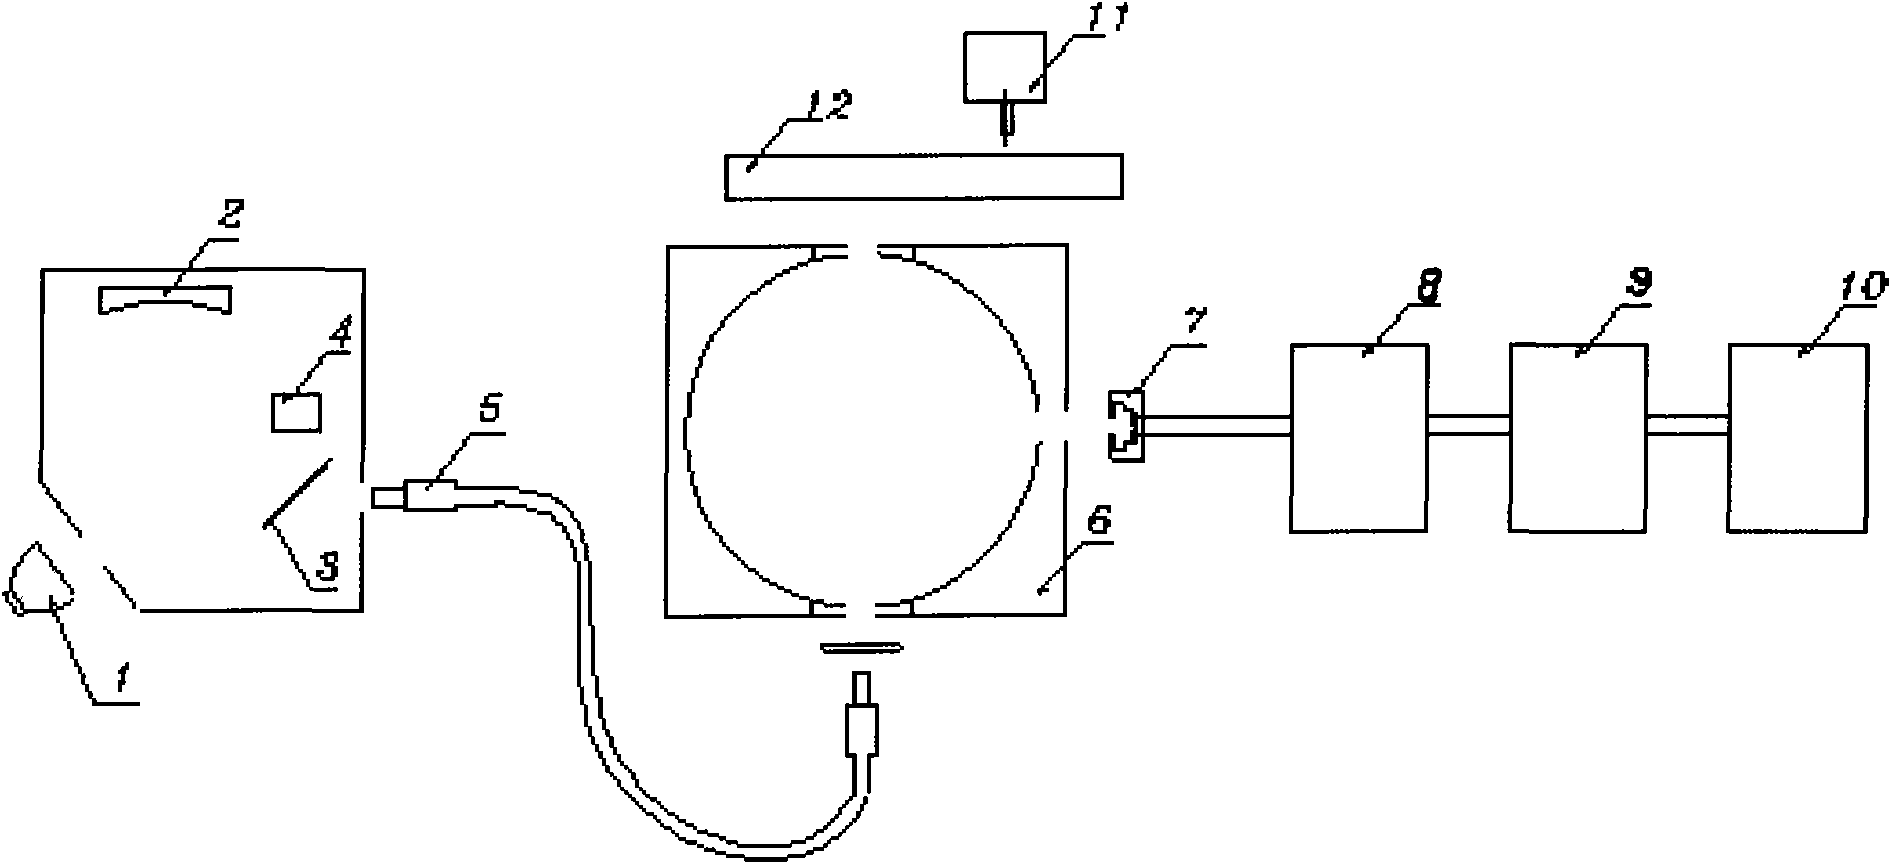 Method for rapidly detecting tea quality through near infrared technology